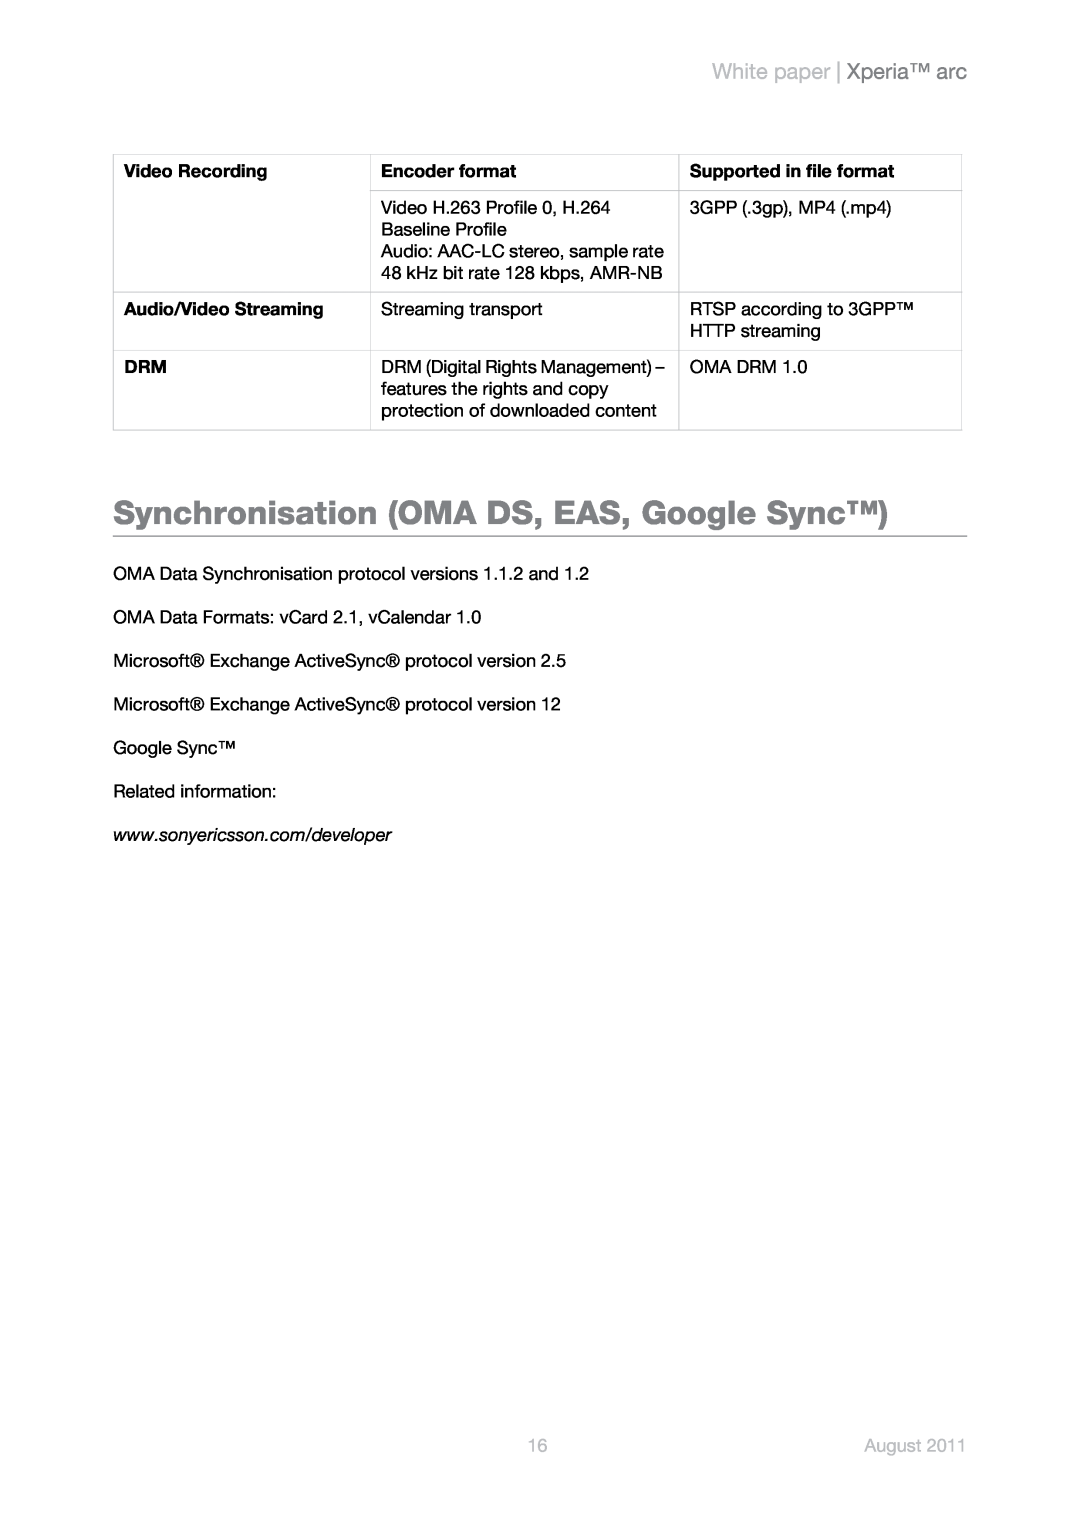 Sony Ericsson LT15a, LT15i manual Synchronisation OMA DS, EAS, Google Sync, White paper Xperia arc, August 